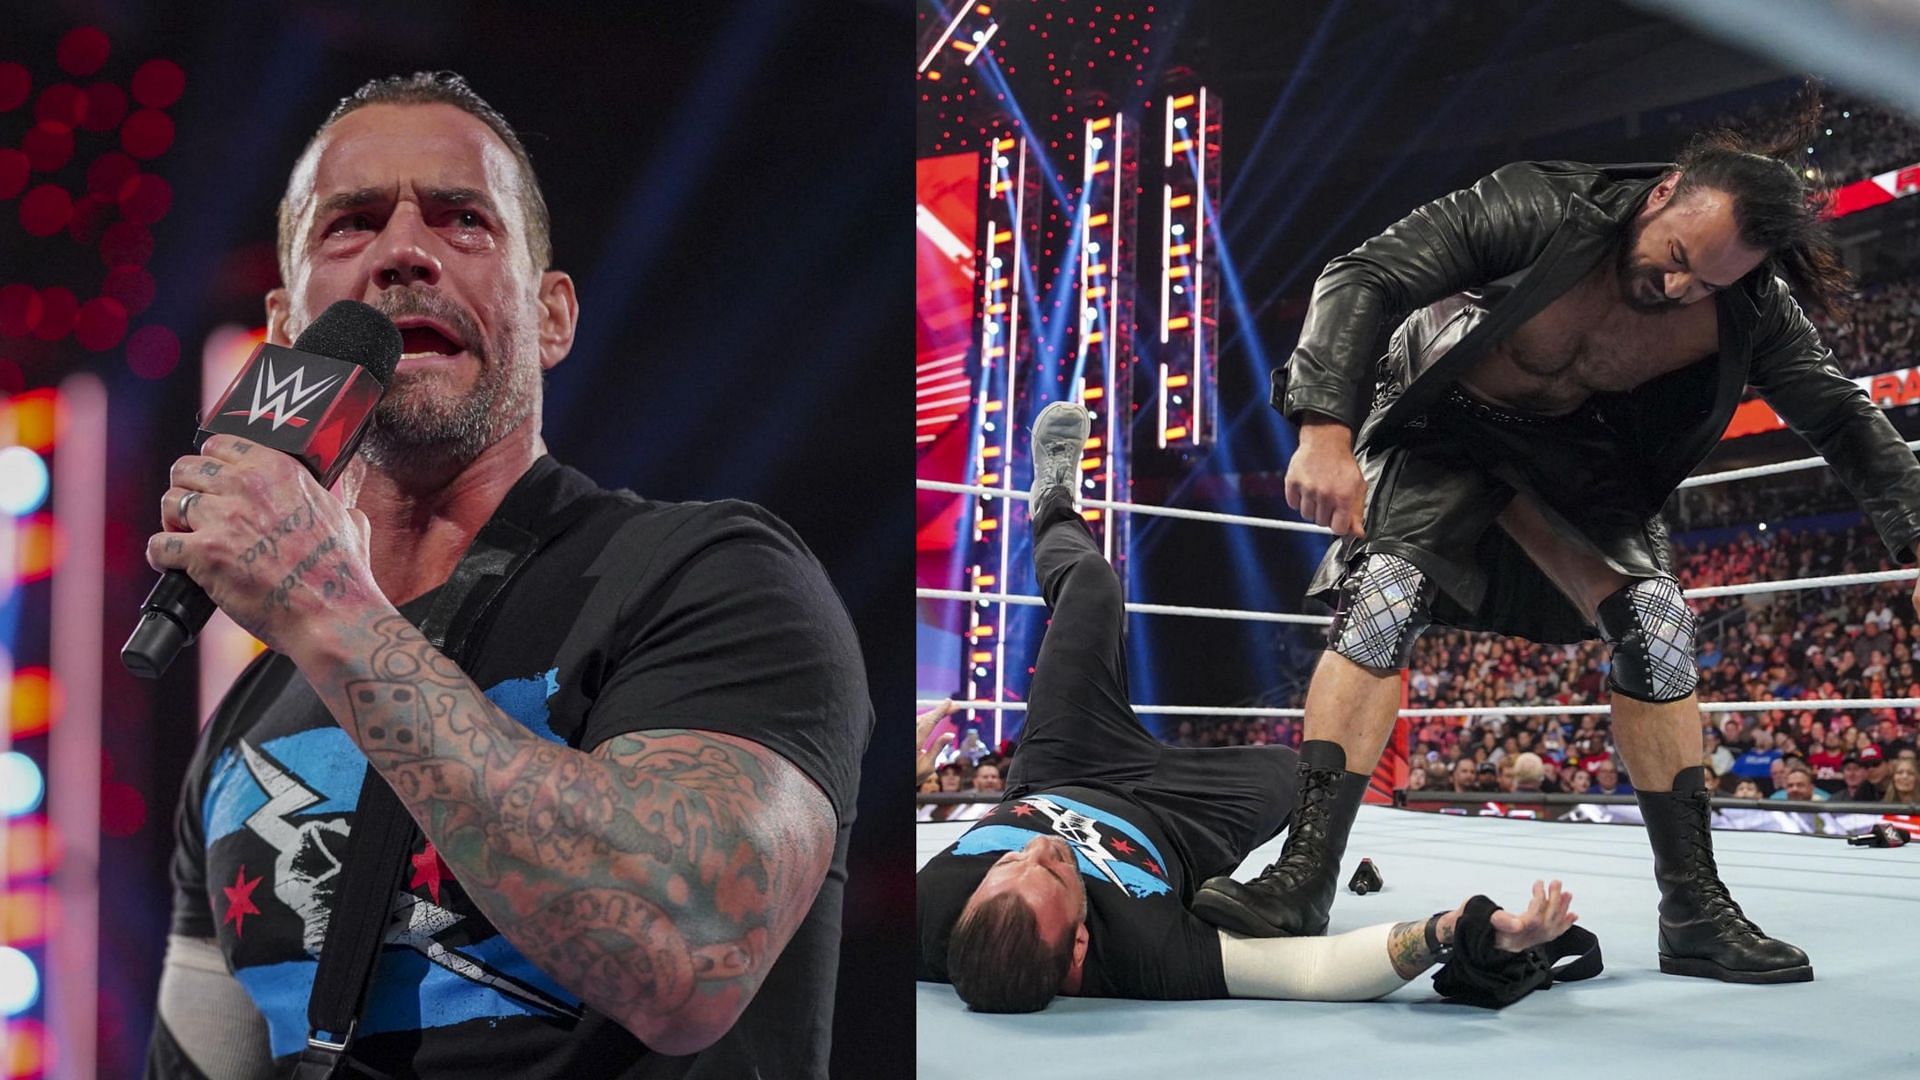 Drew McIntyre attacked CM Punk this week on WWE RAW